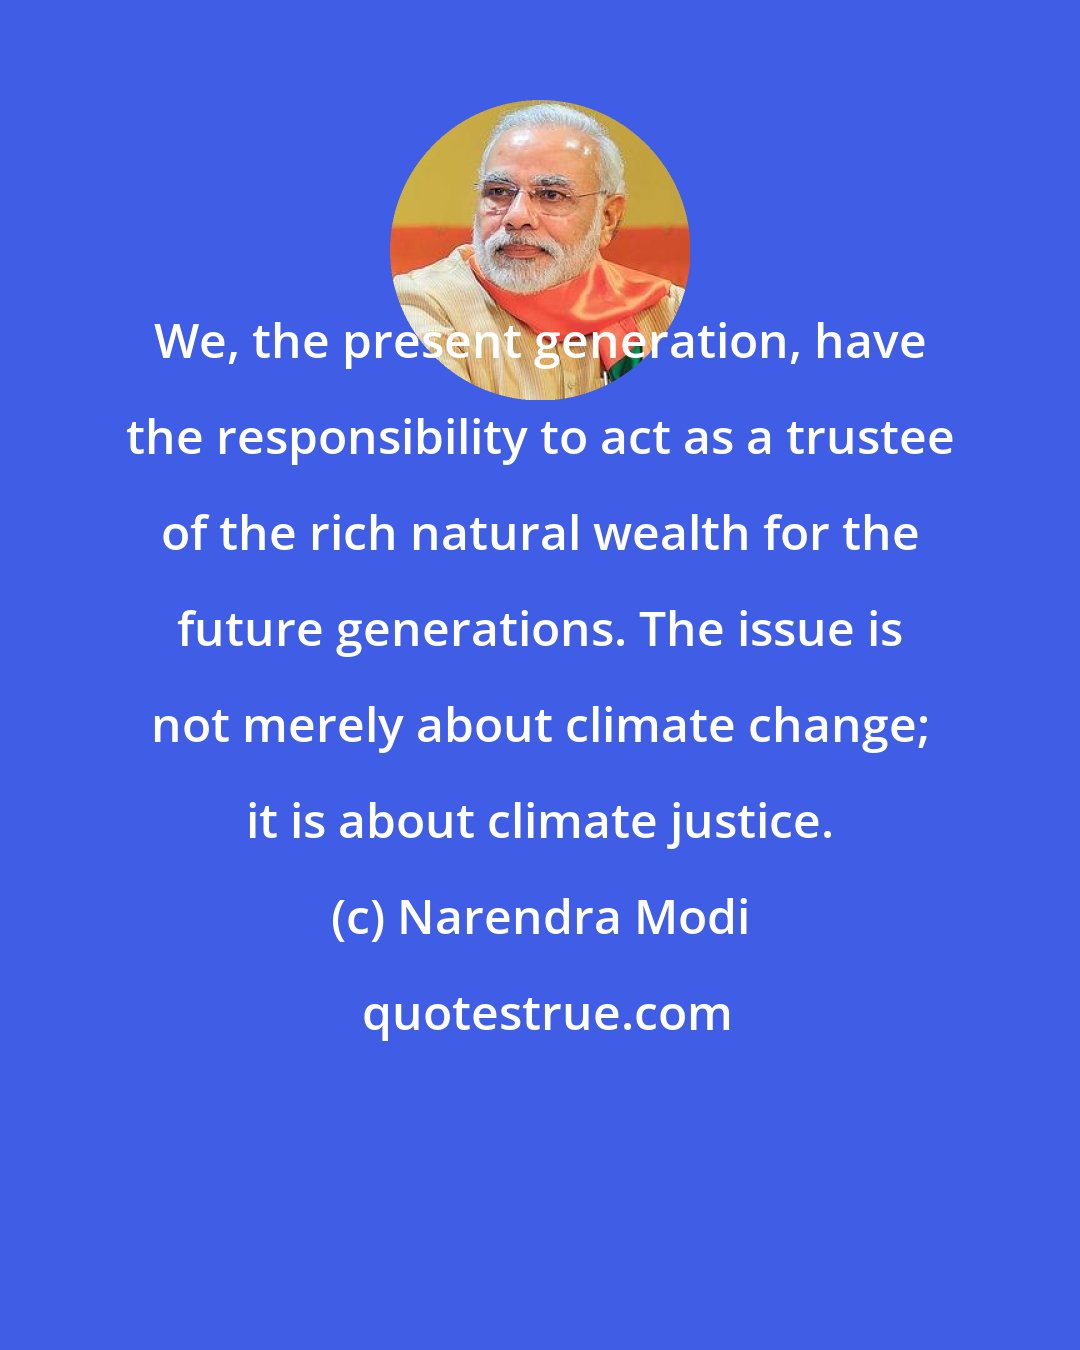 Narendra Modi: We, the present generation, have the responsibility to act as a trustee of the rich natural wealth for the future generations. The issue is not merely about climate change; it is about climate justice.